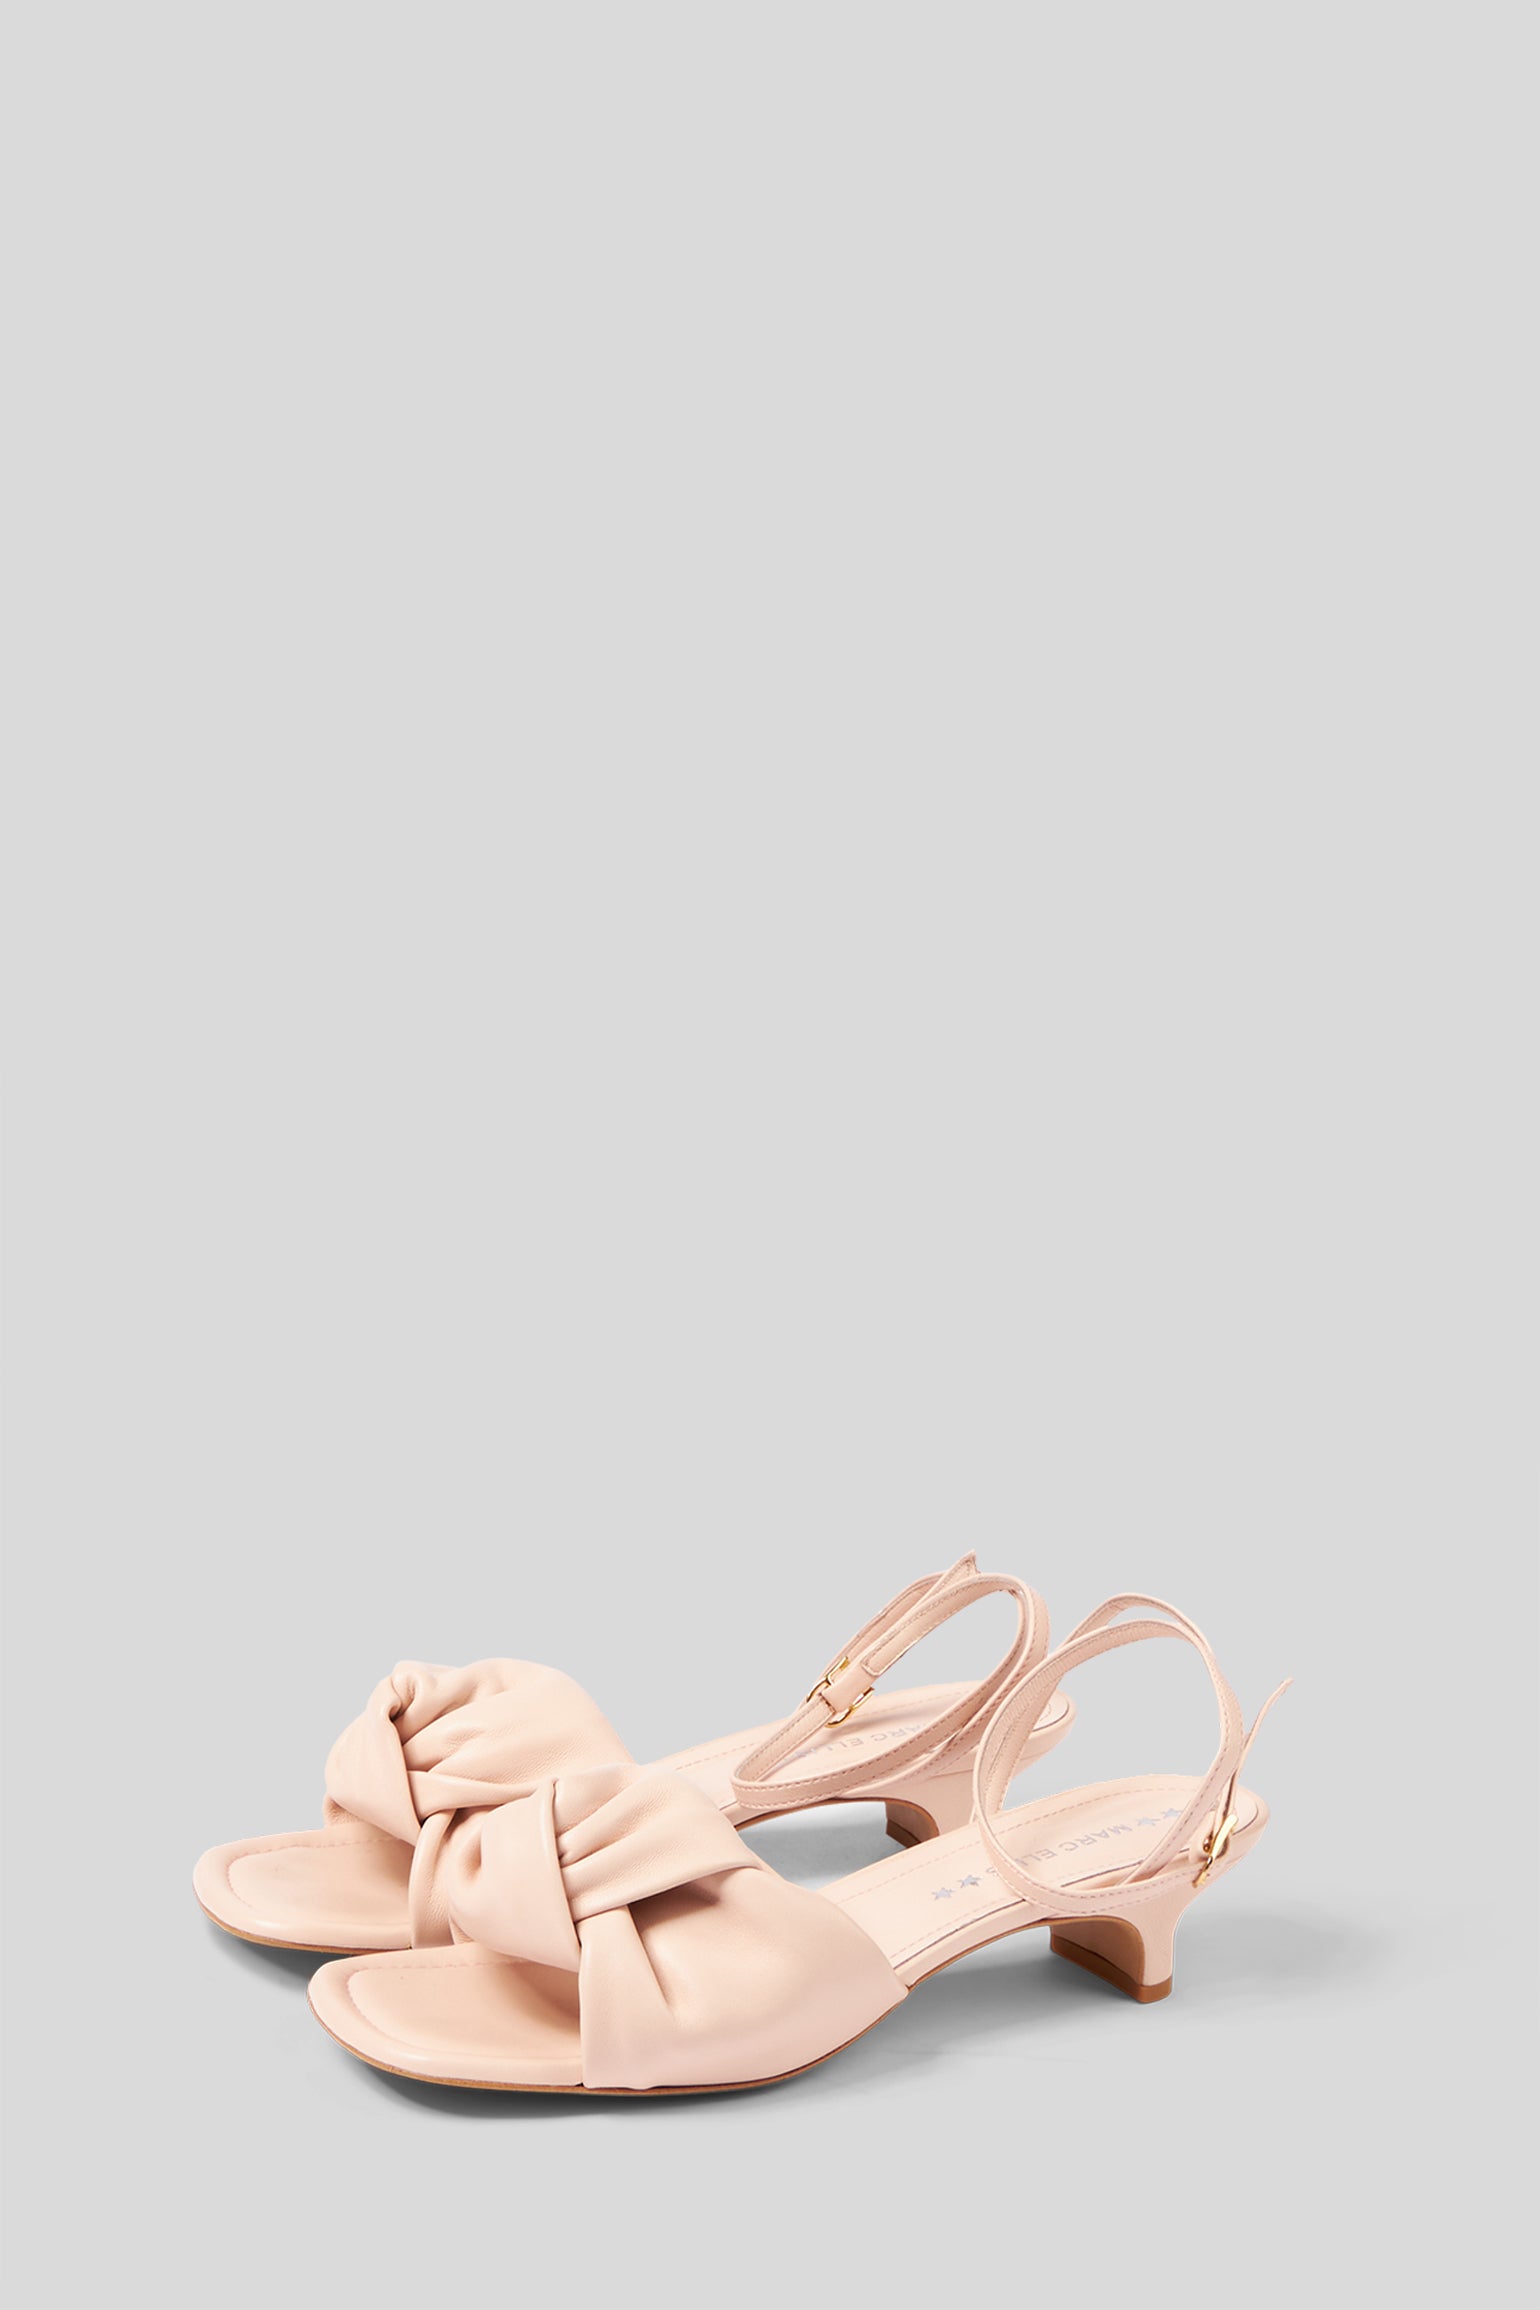 Sandal with Low Heel and Poppy Knot Marck Ellis